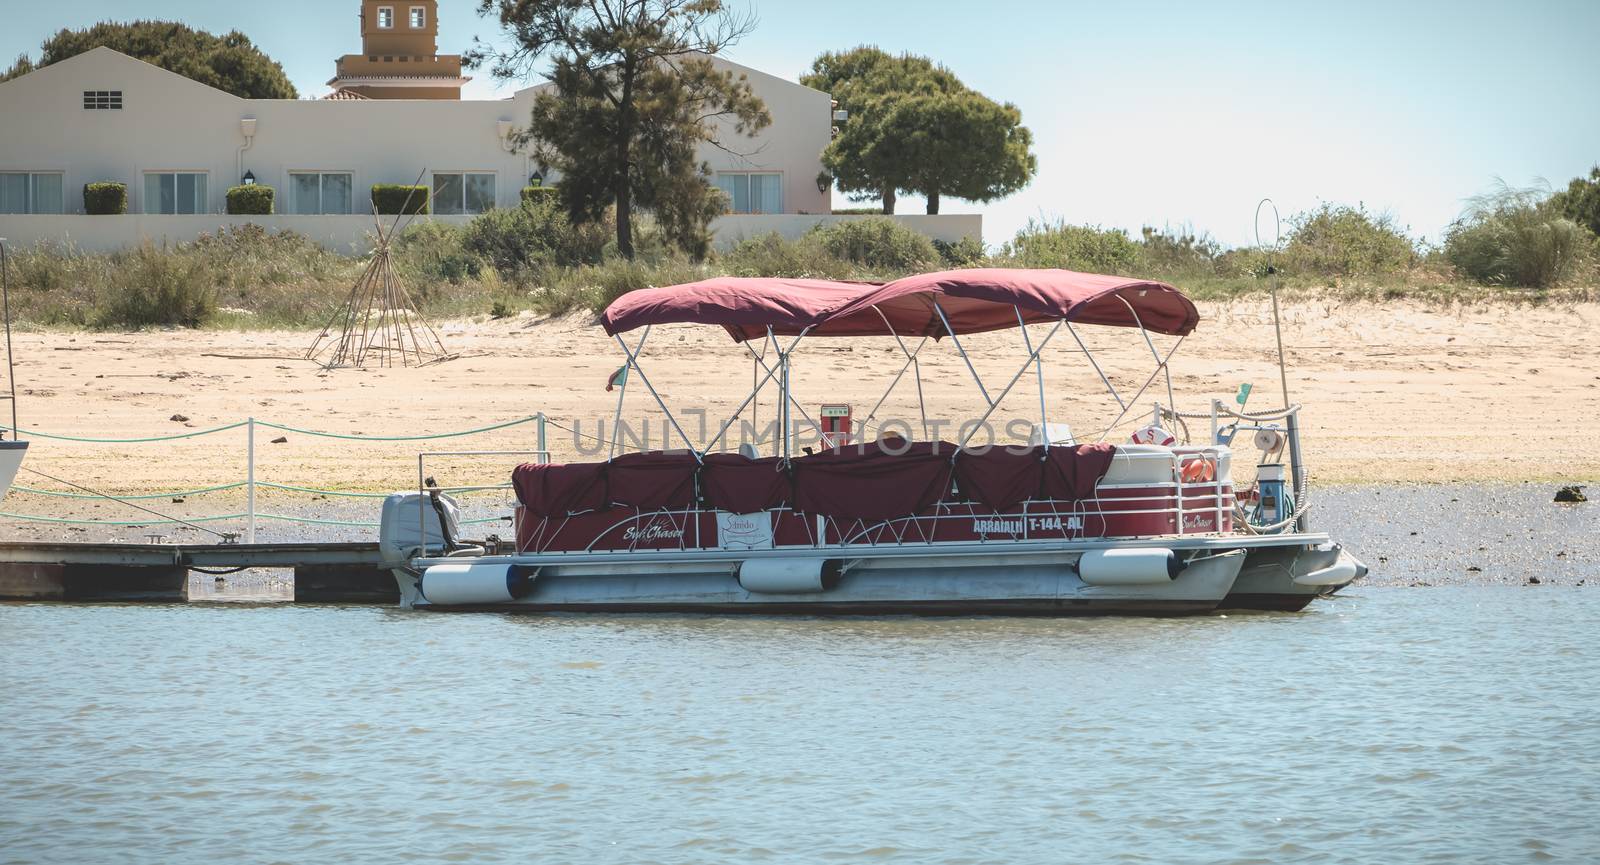 Tourist transport boats moored in the lagoons of the Ria Formosa by AtlanticEUROSTOXX